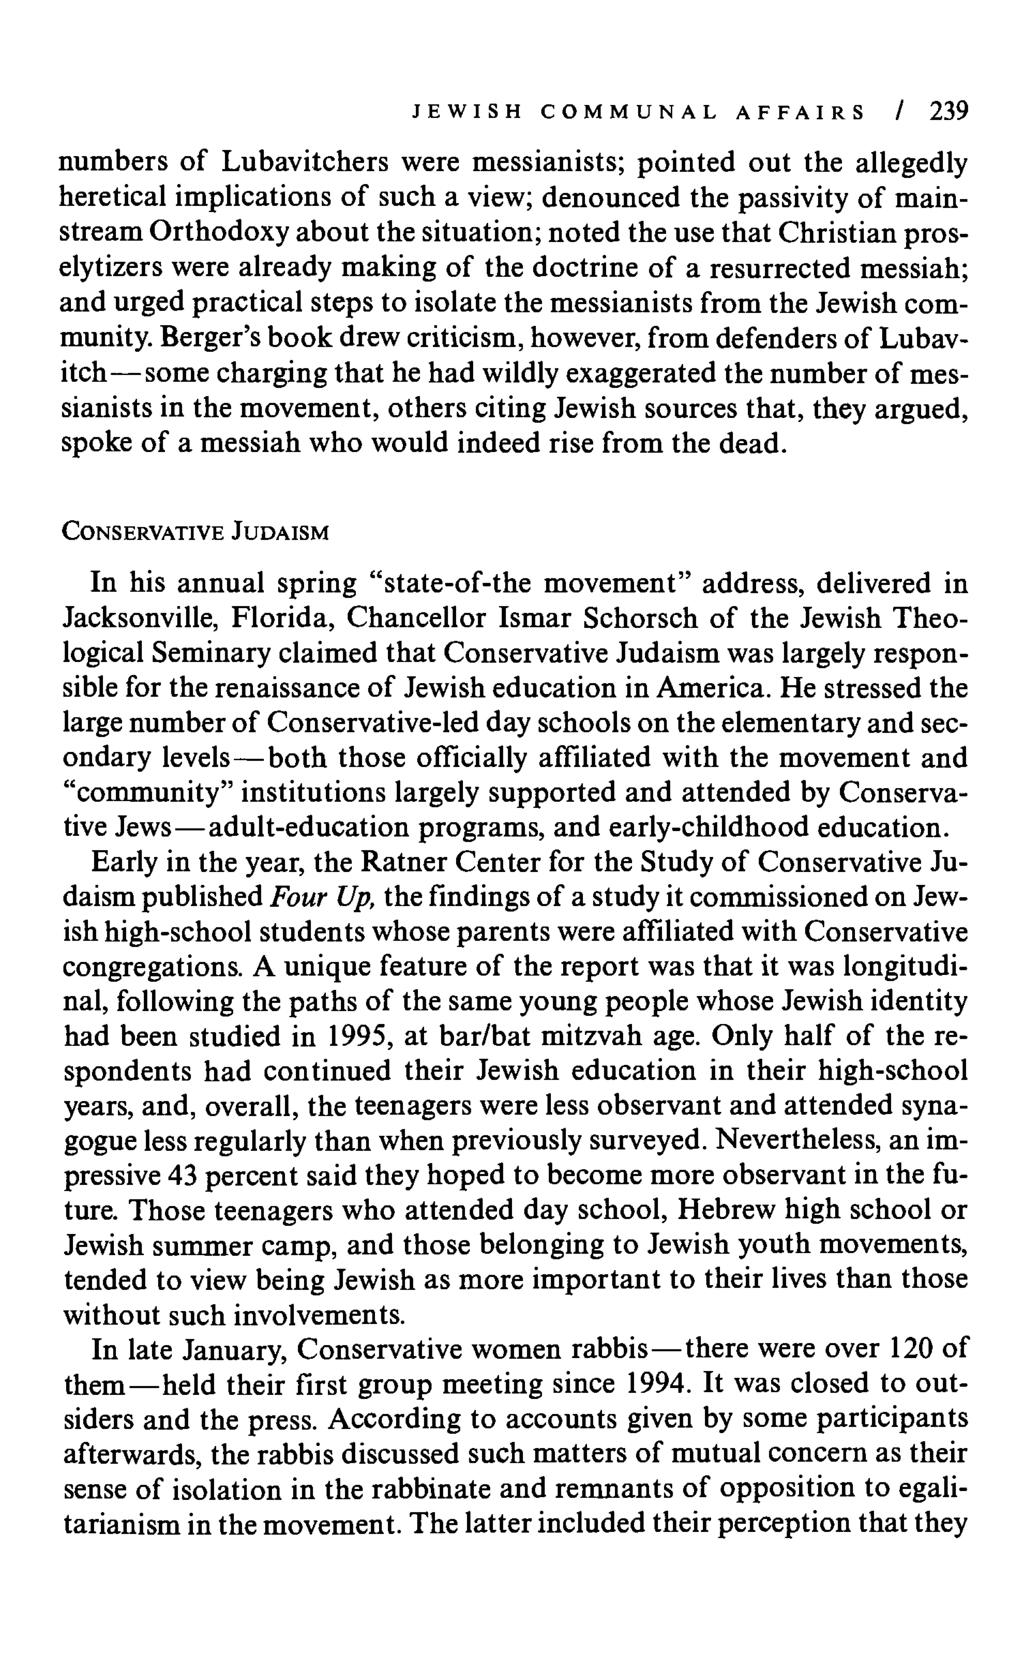 JEWISH COMMUNAL AFFAIRS / 239 numbers of Lubavitchers were messianists; pointed out the allegedly heretical implications of such a view; denounced the passivity of mainstream Orthodoxy about the